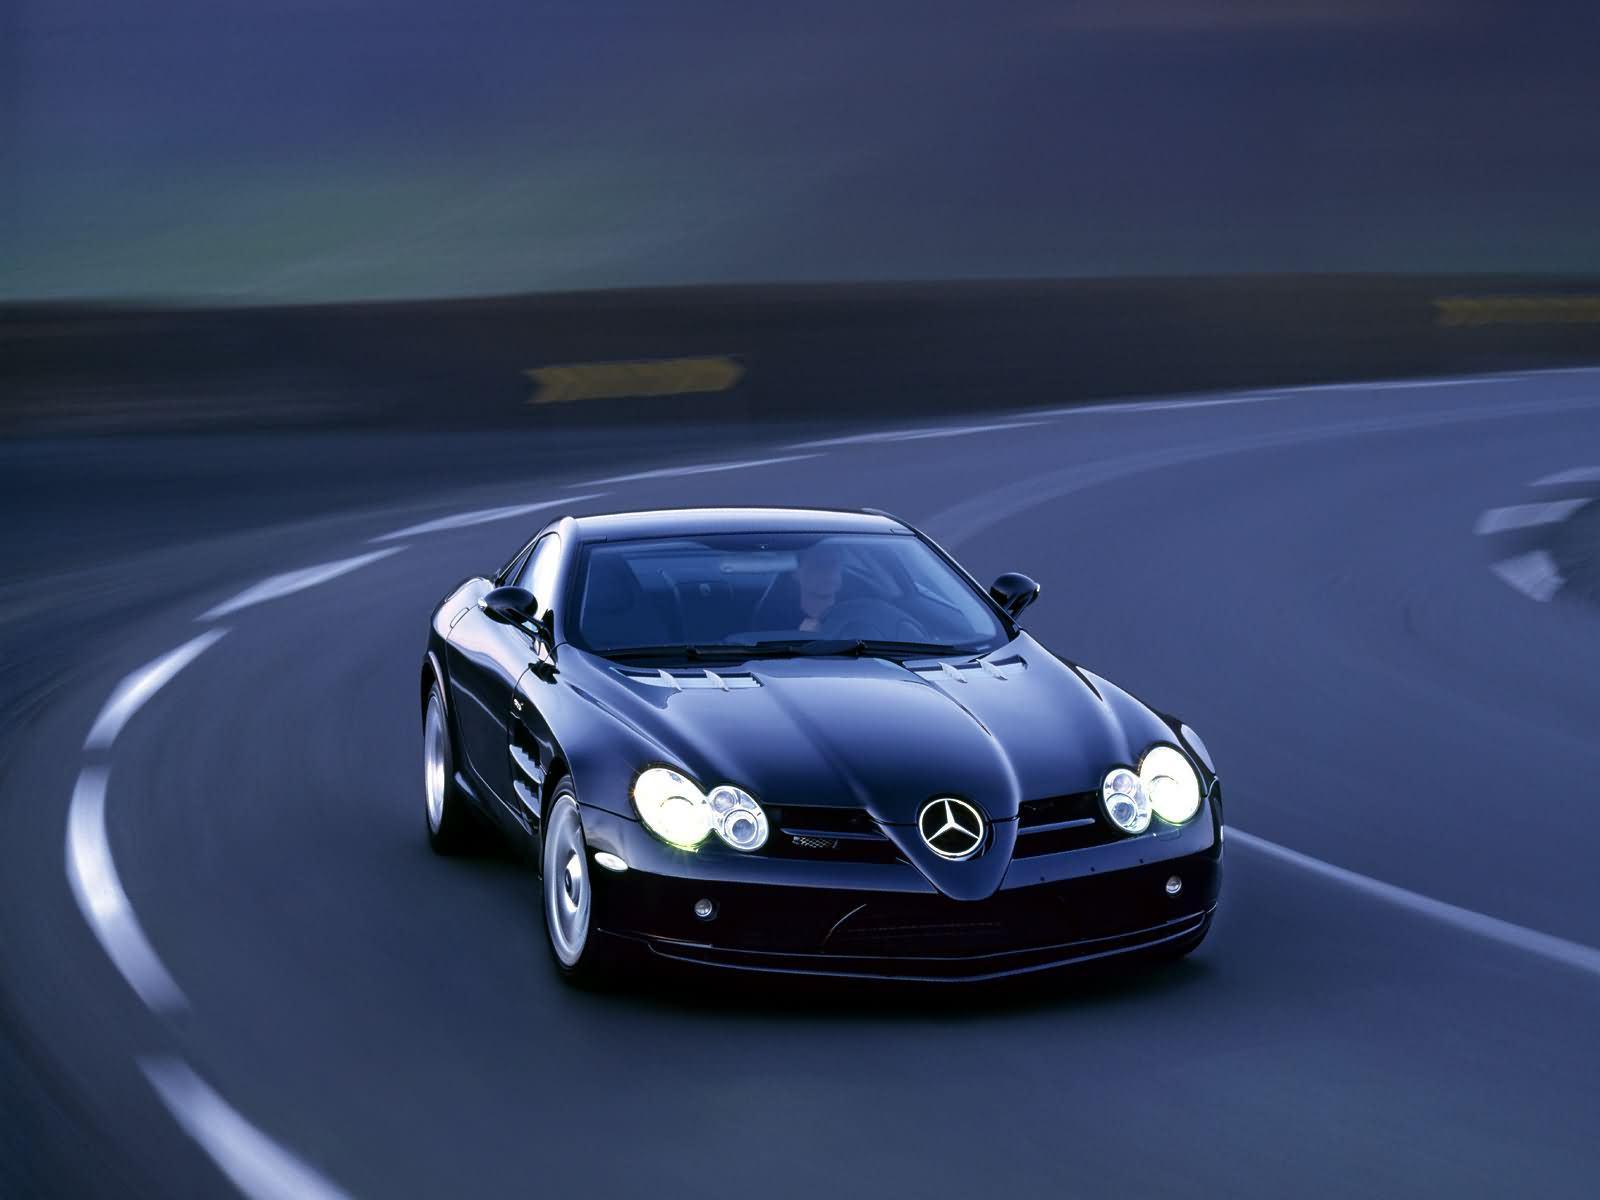 Luxury Car Wallpapers - Wallpaper Cave